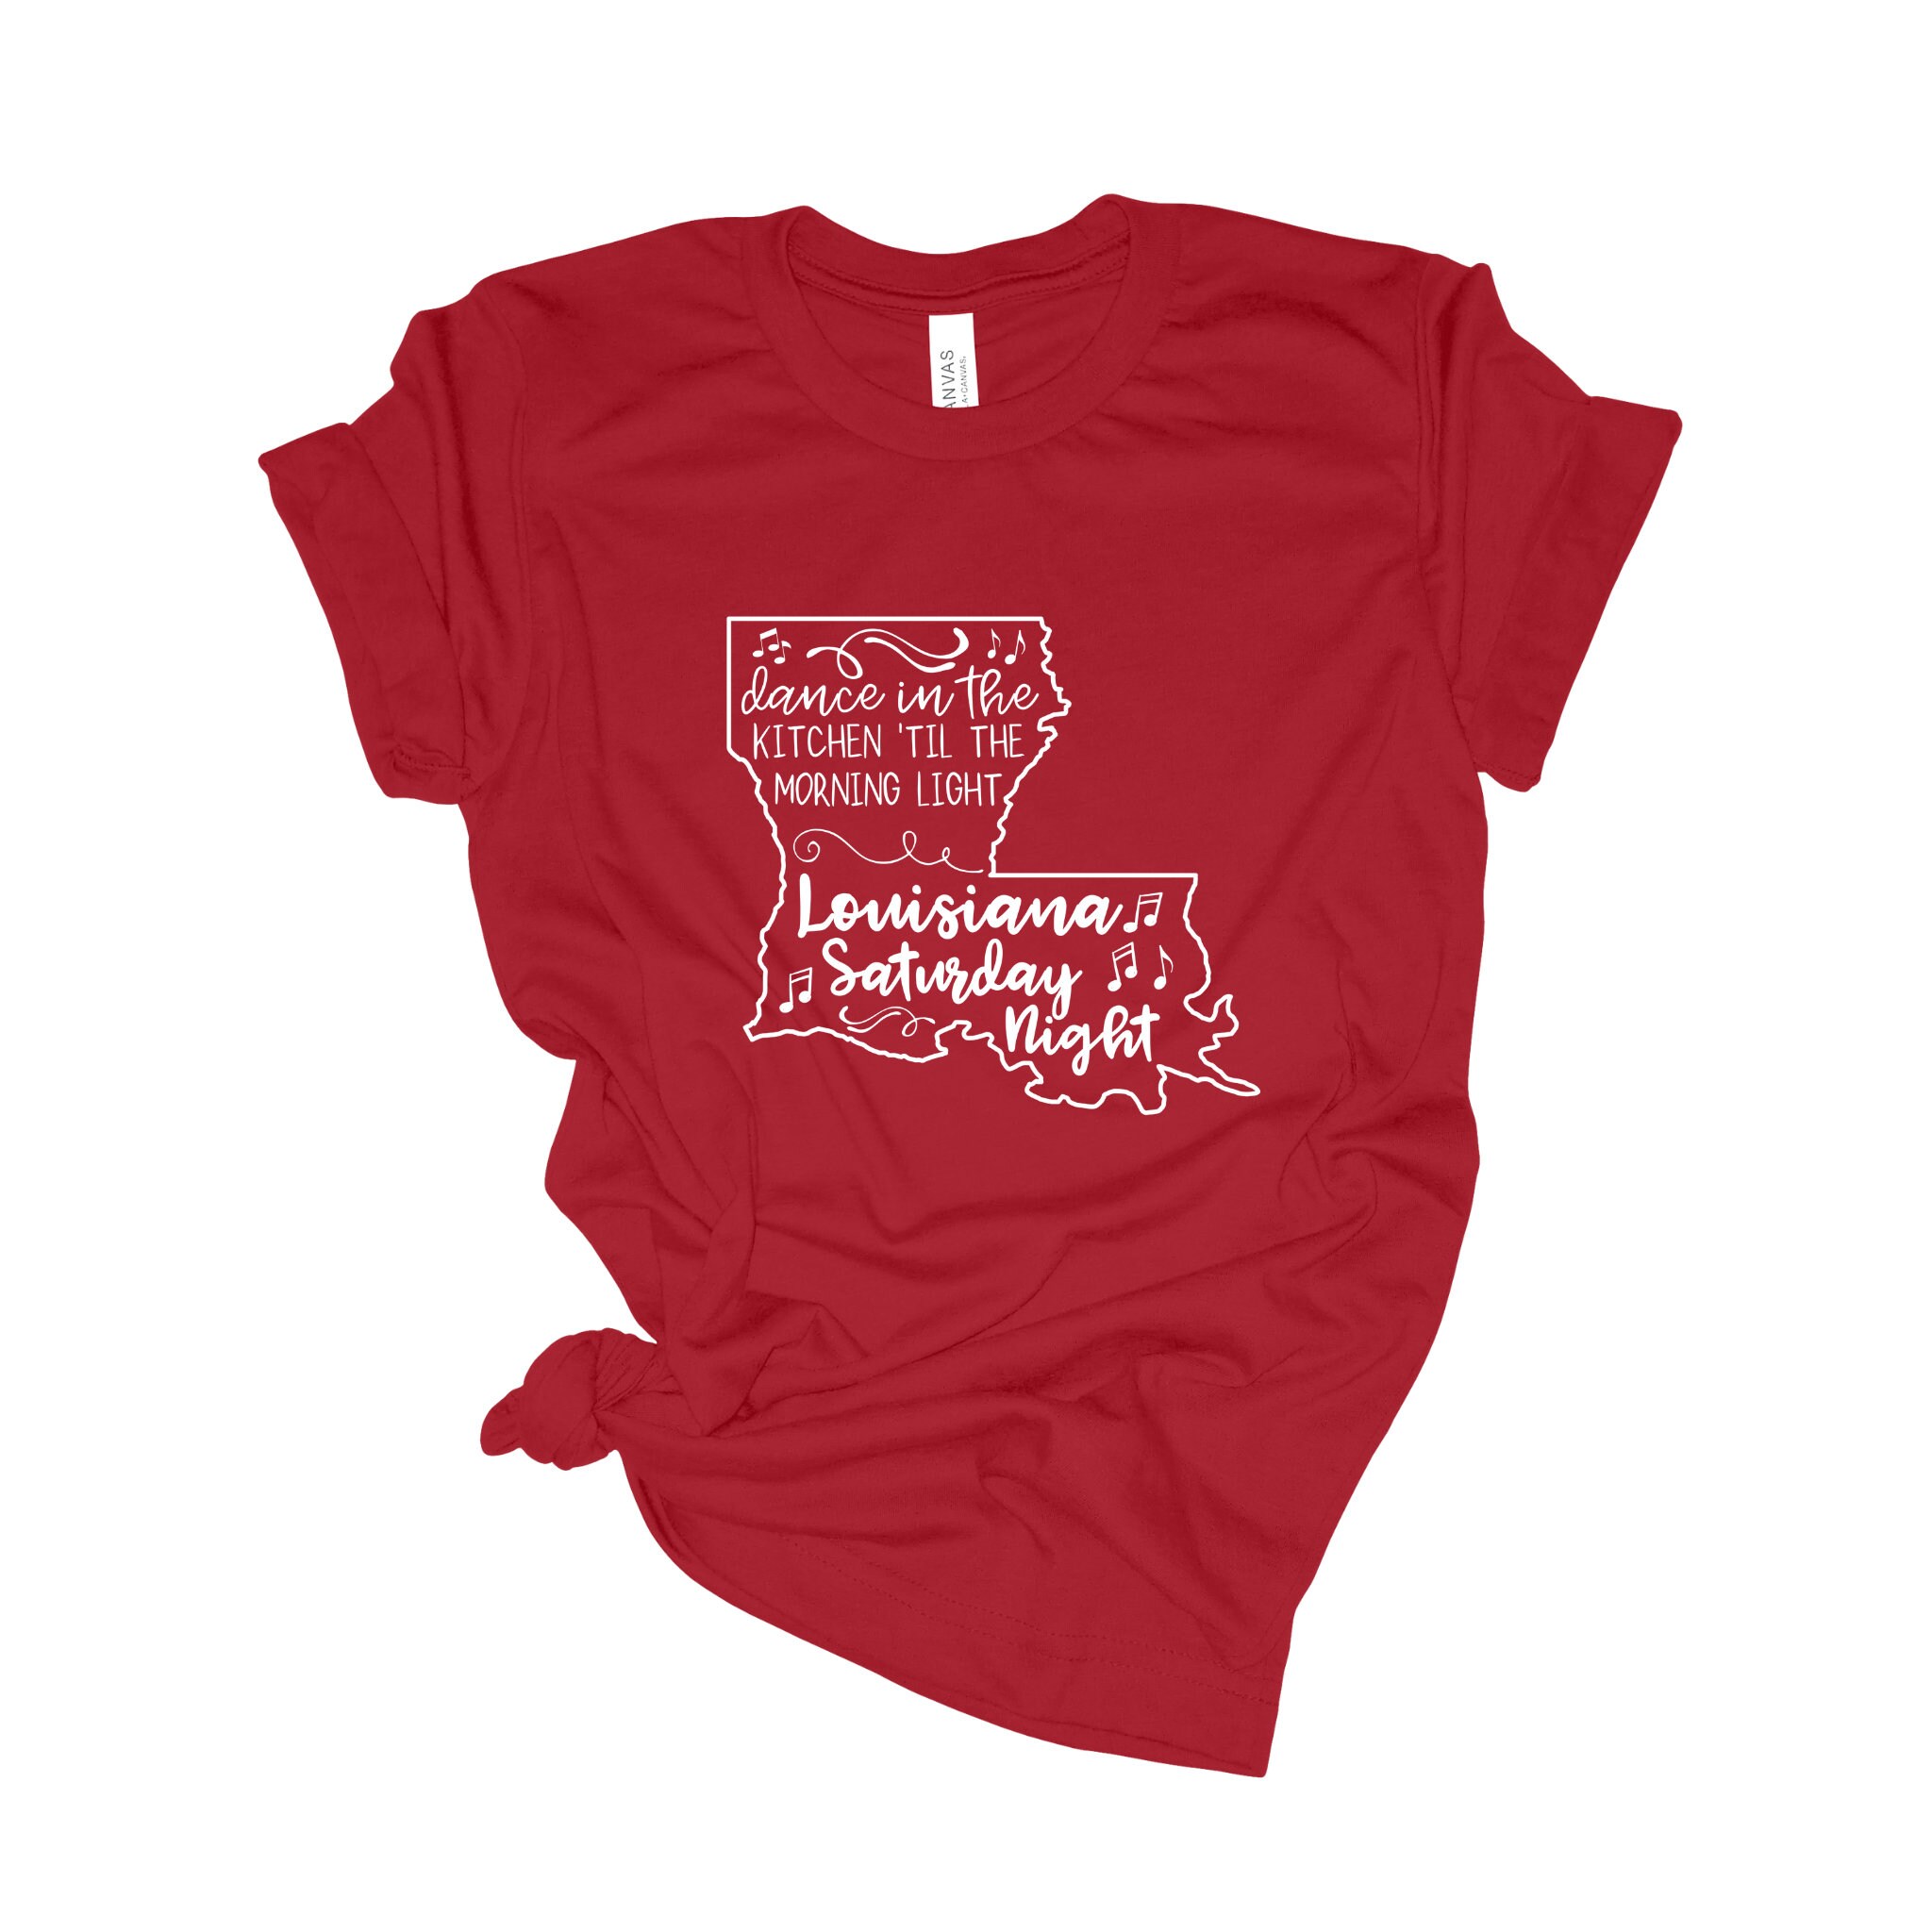 Louisiana feed your soul, | Essential T-Shirt